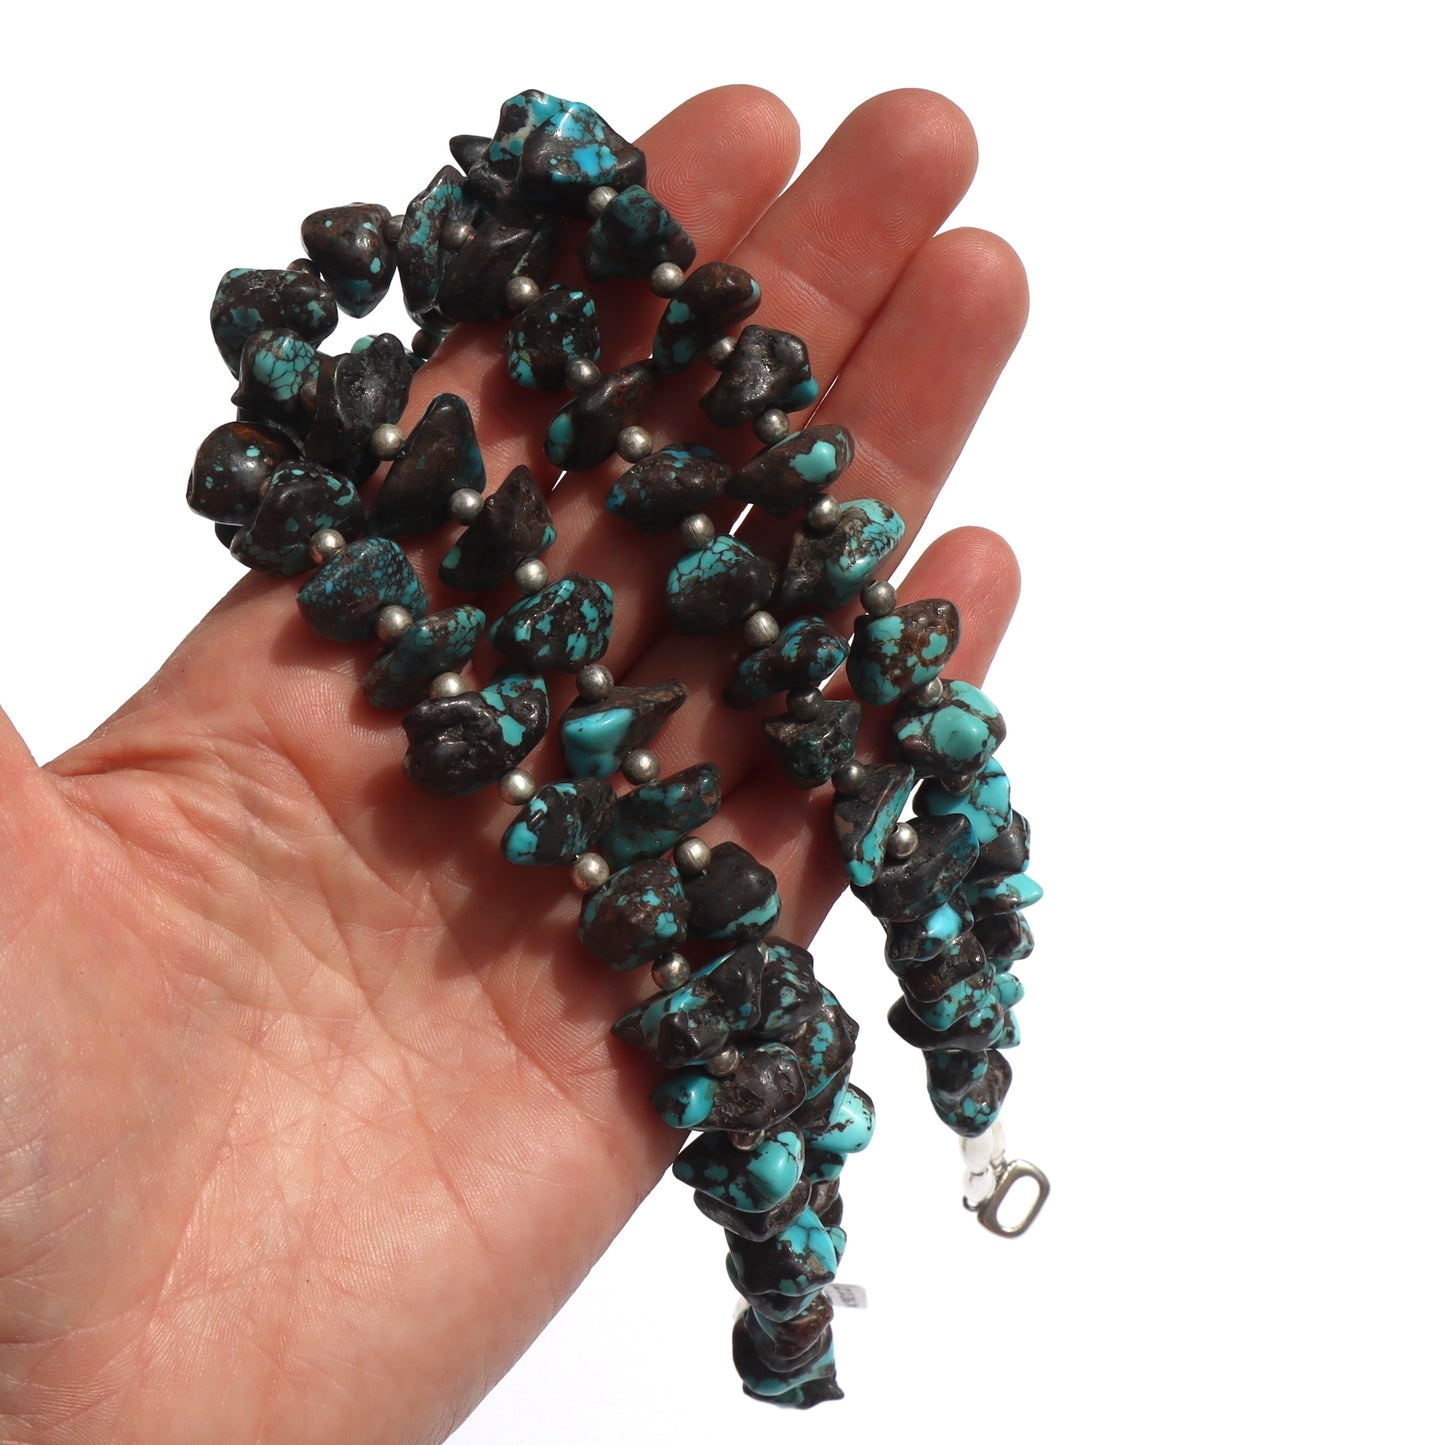 Vintage Santo Domingo Sterling Silver Turquoise Rough Polished Nugget Double Strand Necklace